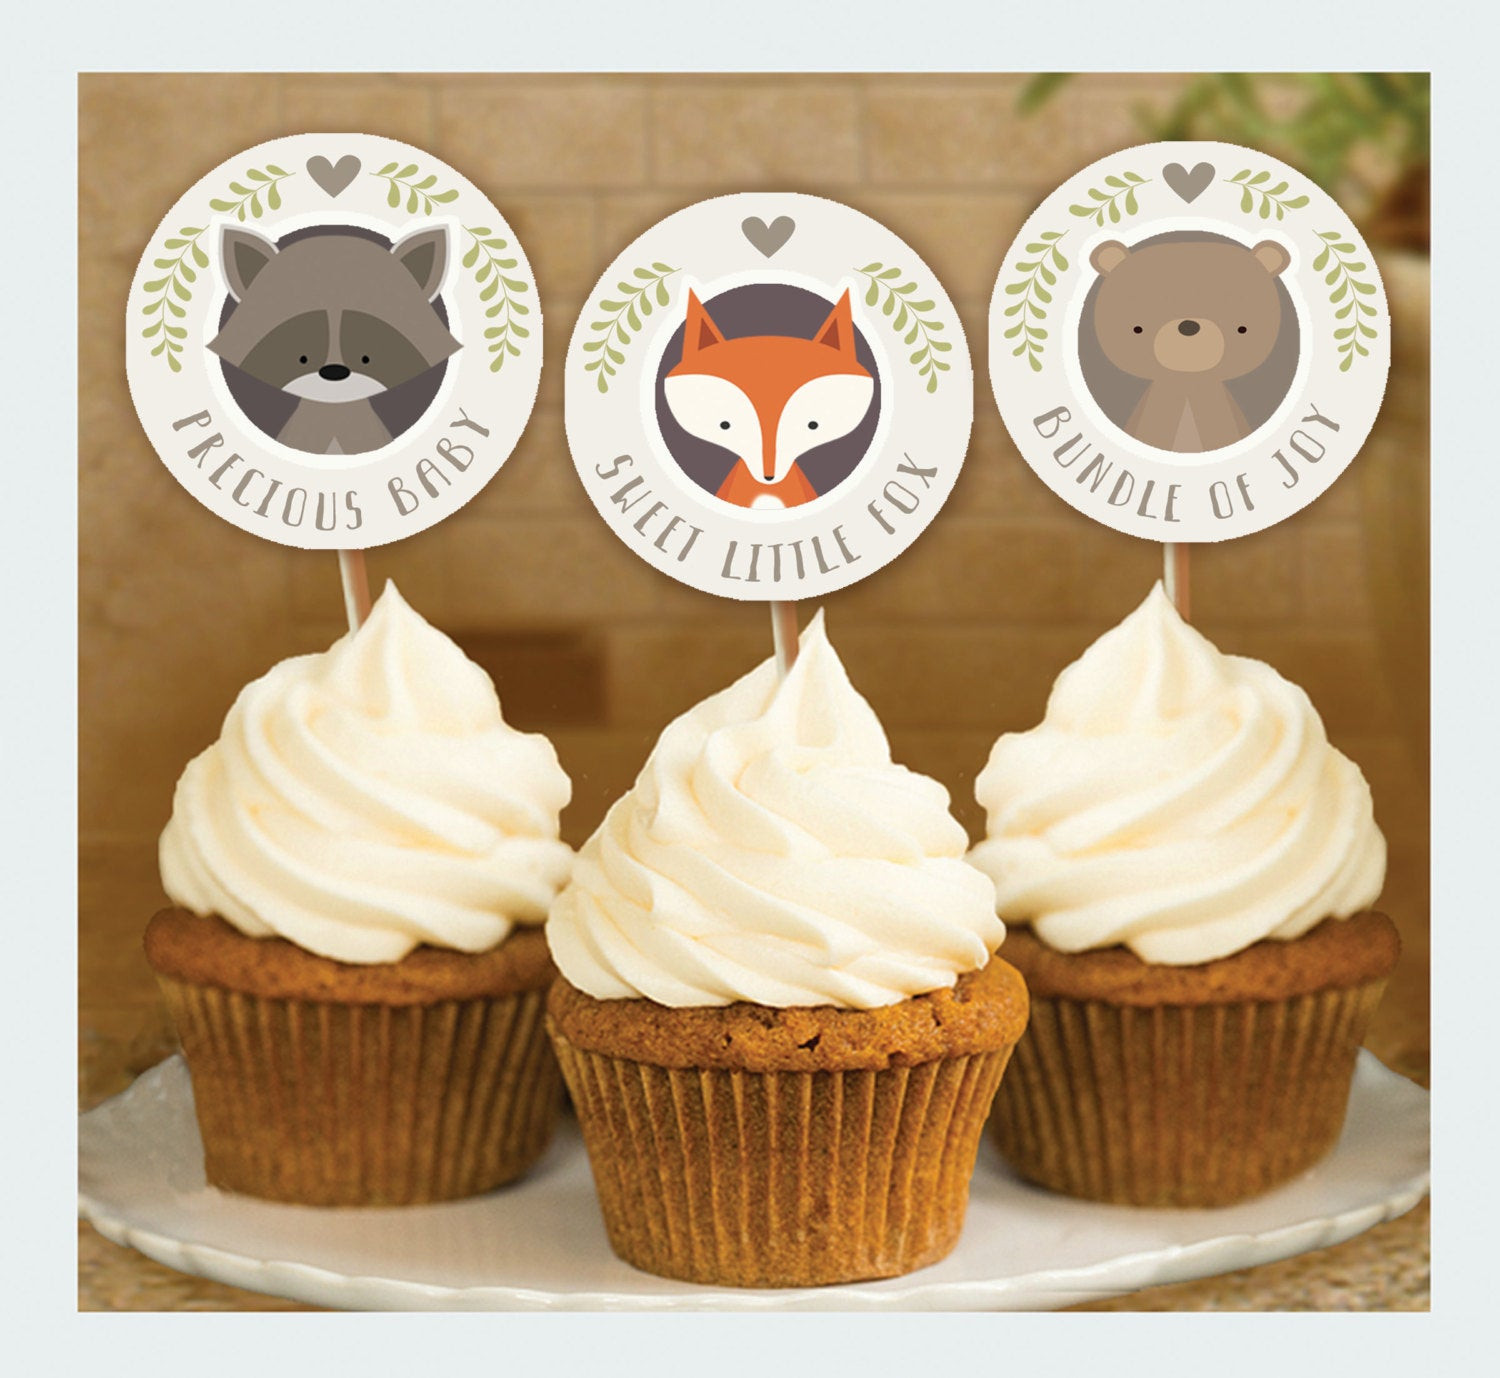 Woodland Themed Baby Shower Cupcakes
 Woodland Animal Baby Shower Cupcake Toppers